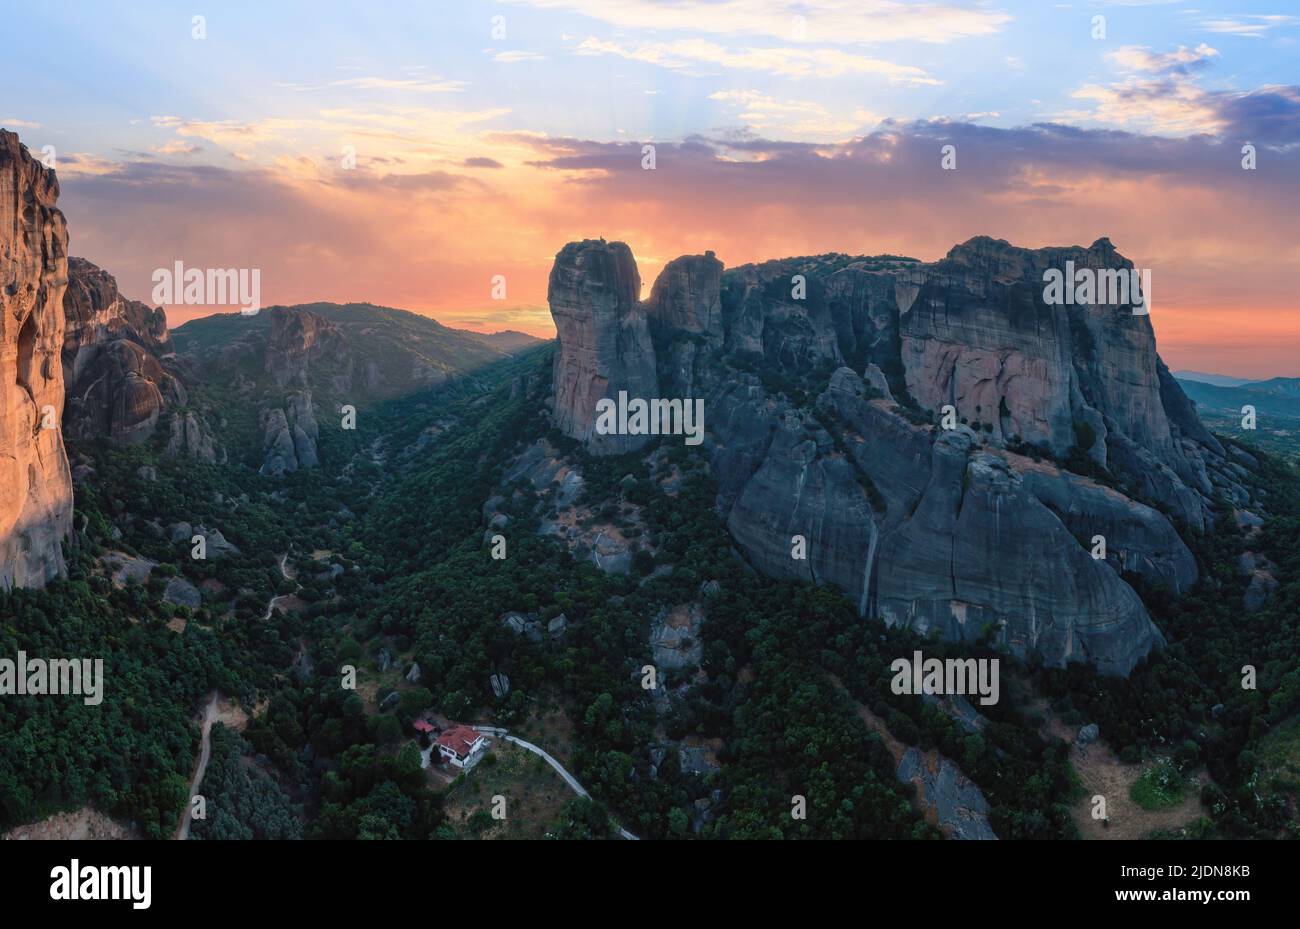 Meteora Greece rock formations at sunset. Colorful sky with clouds over rocky landscape. Europe travel destination Stock Photo